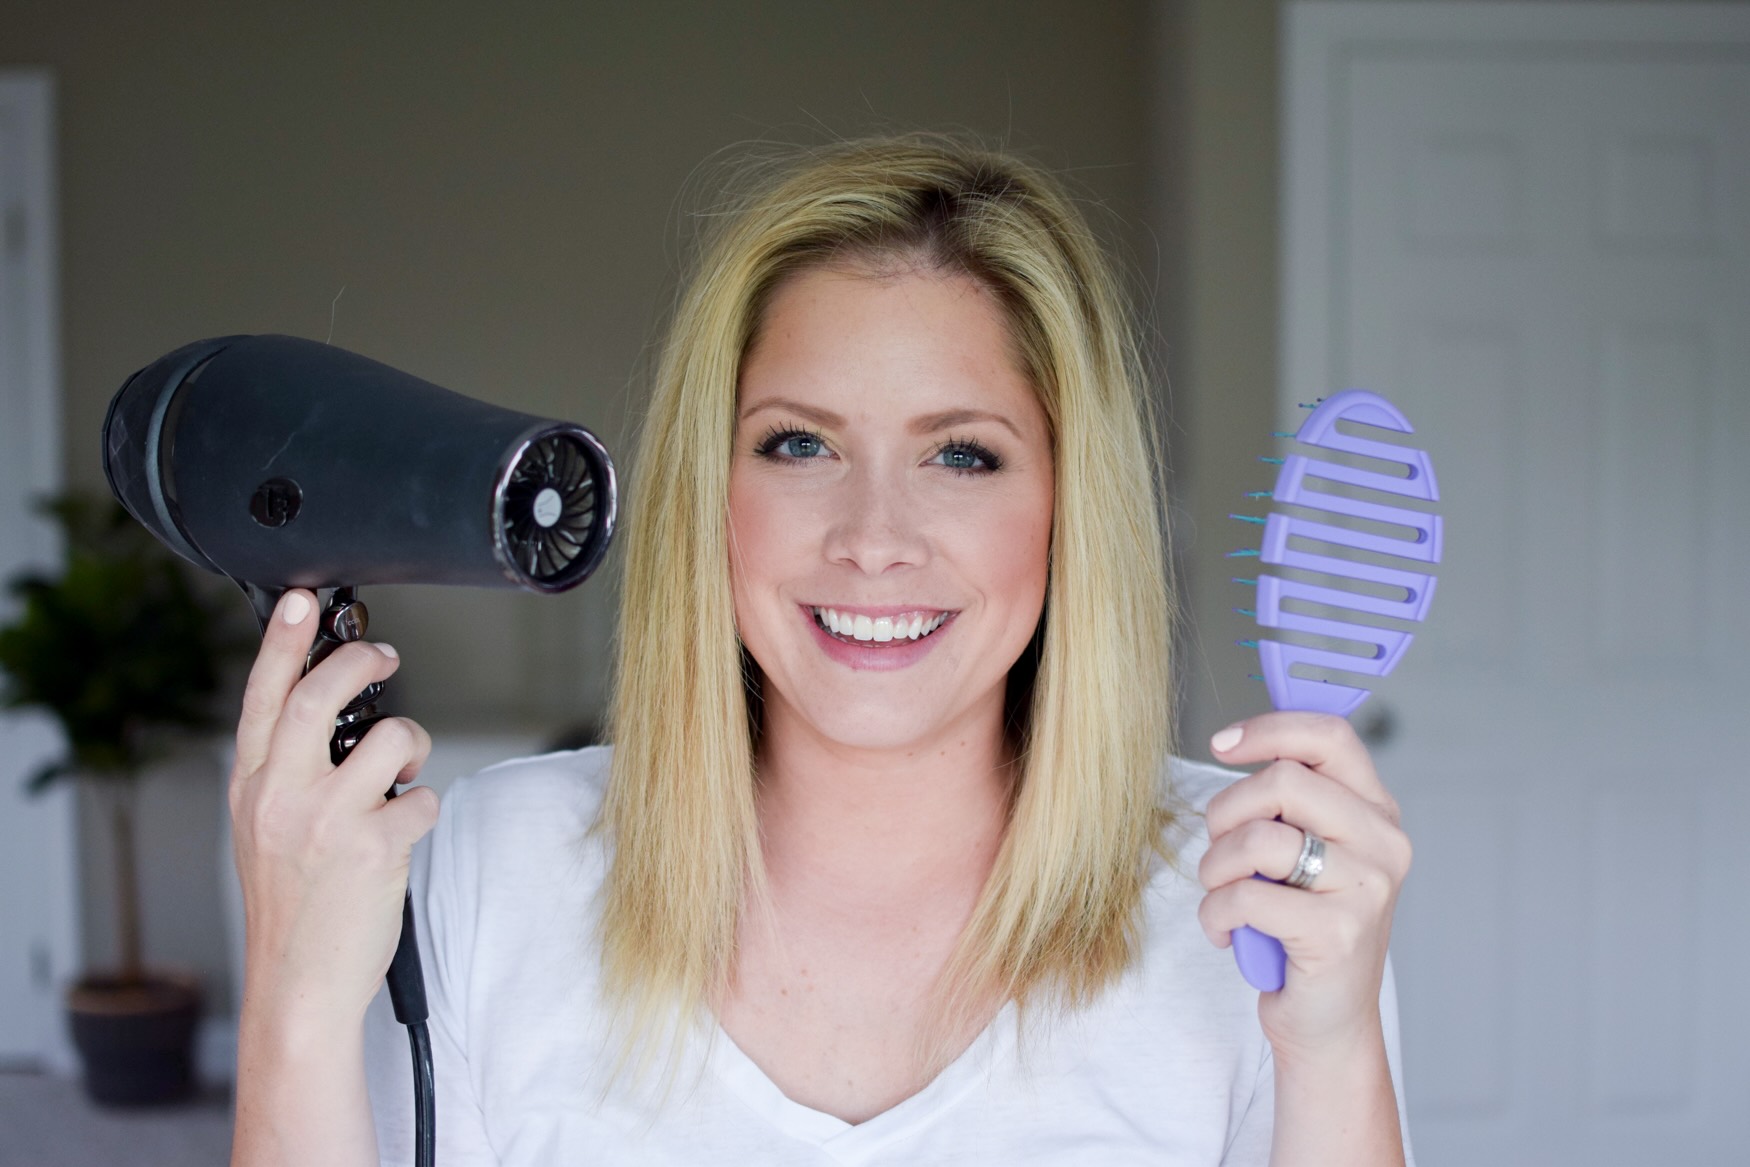 How To Dry Your Hair Fast With A Hair Dryer